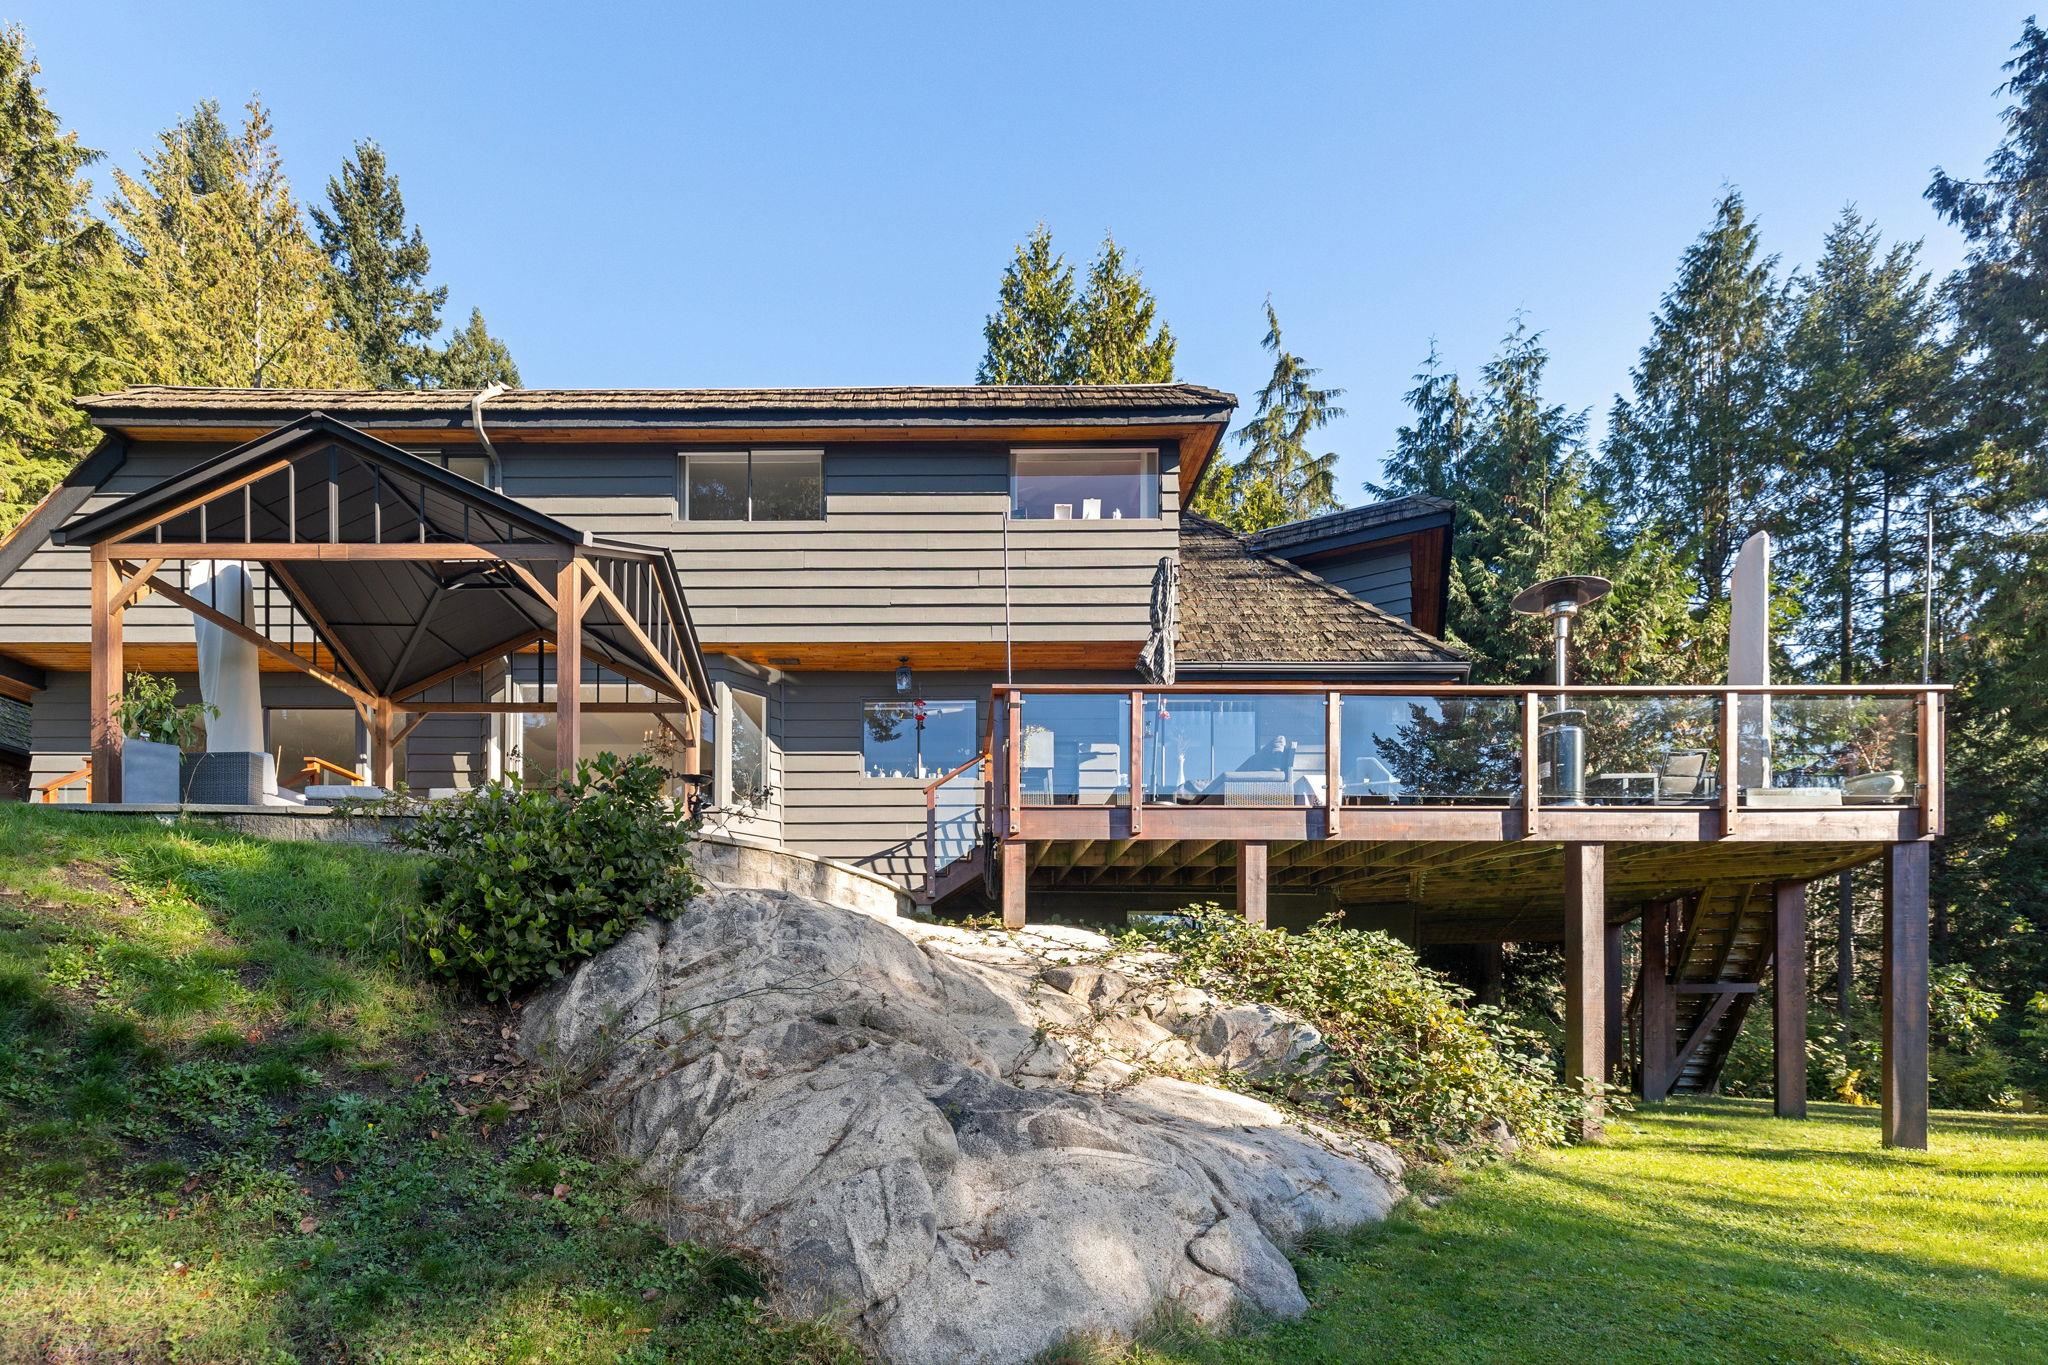 Listing image of 4286 ROCKEND PLACE